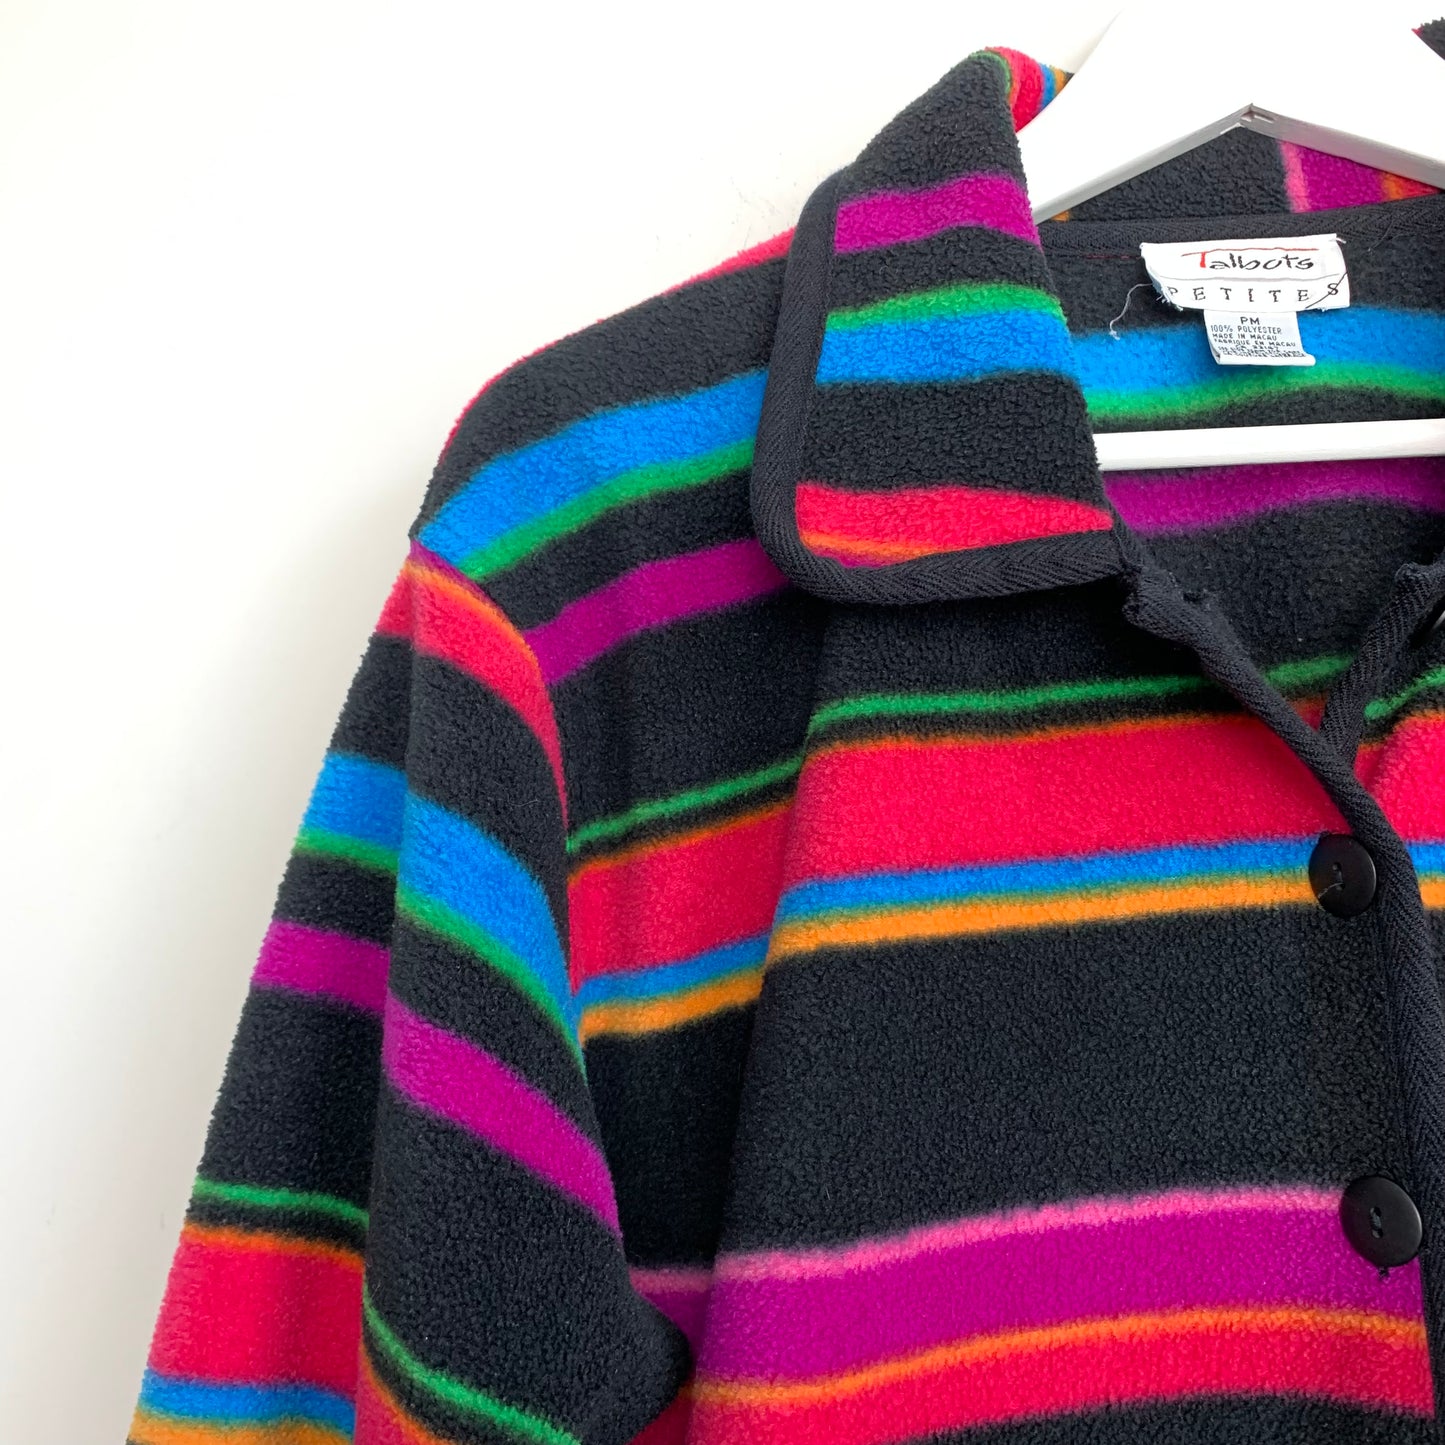 90s Talbots Colorful Fleece Striped Jacket Collared Cropped Medium Petite